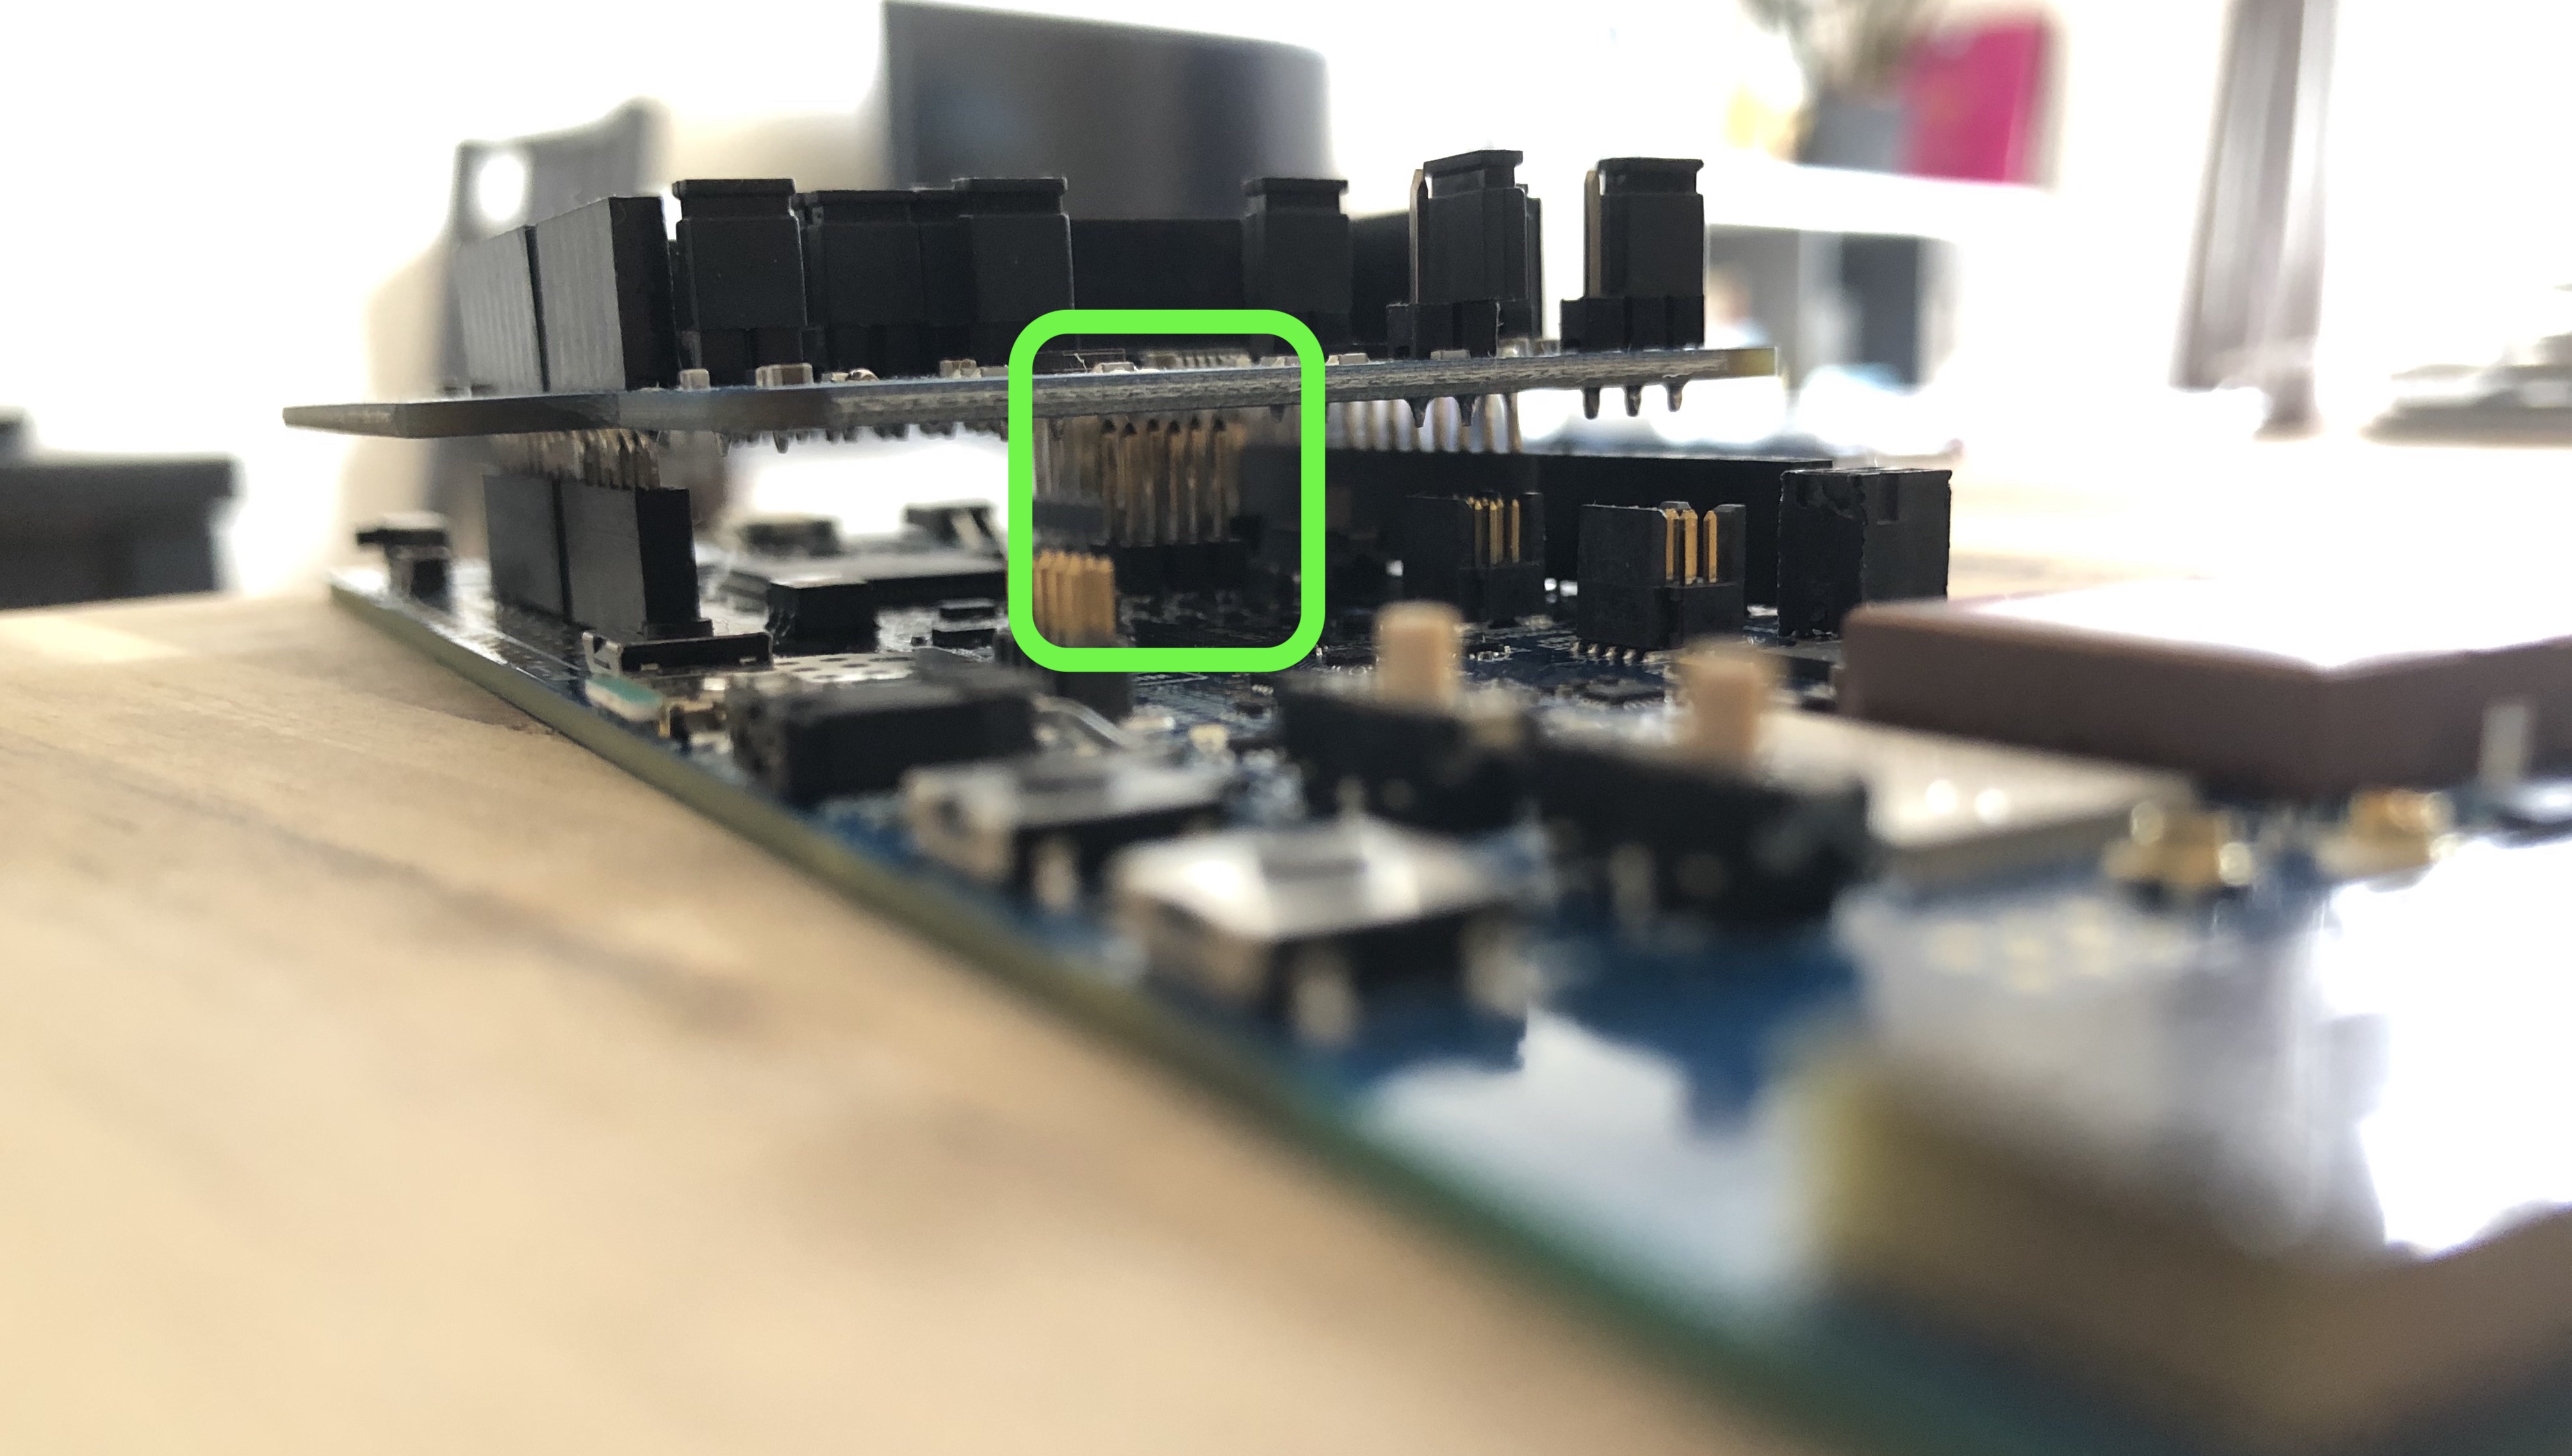 Make sure the shield does not touch any of the pins in the middle of the development board.